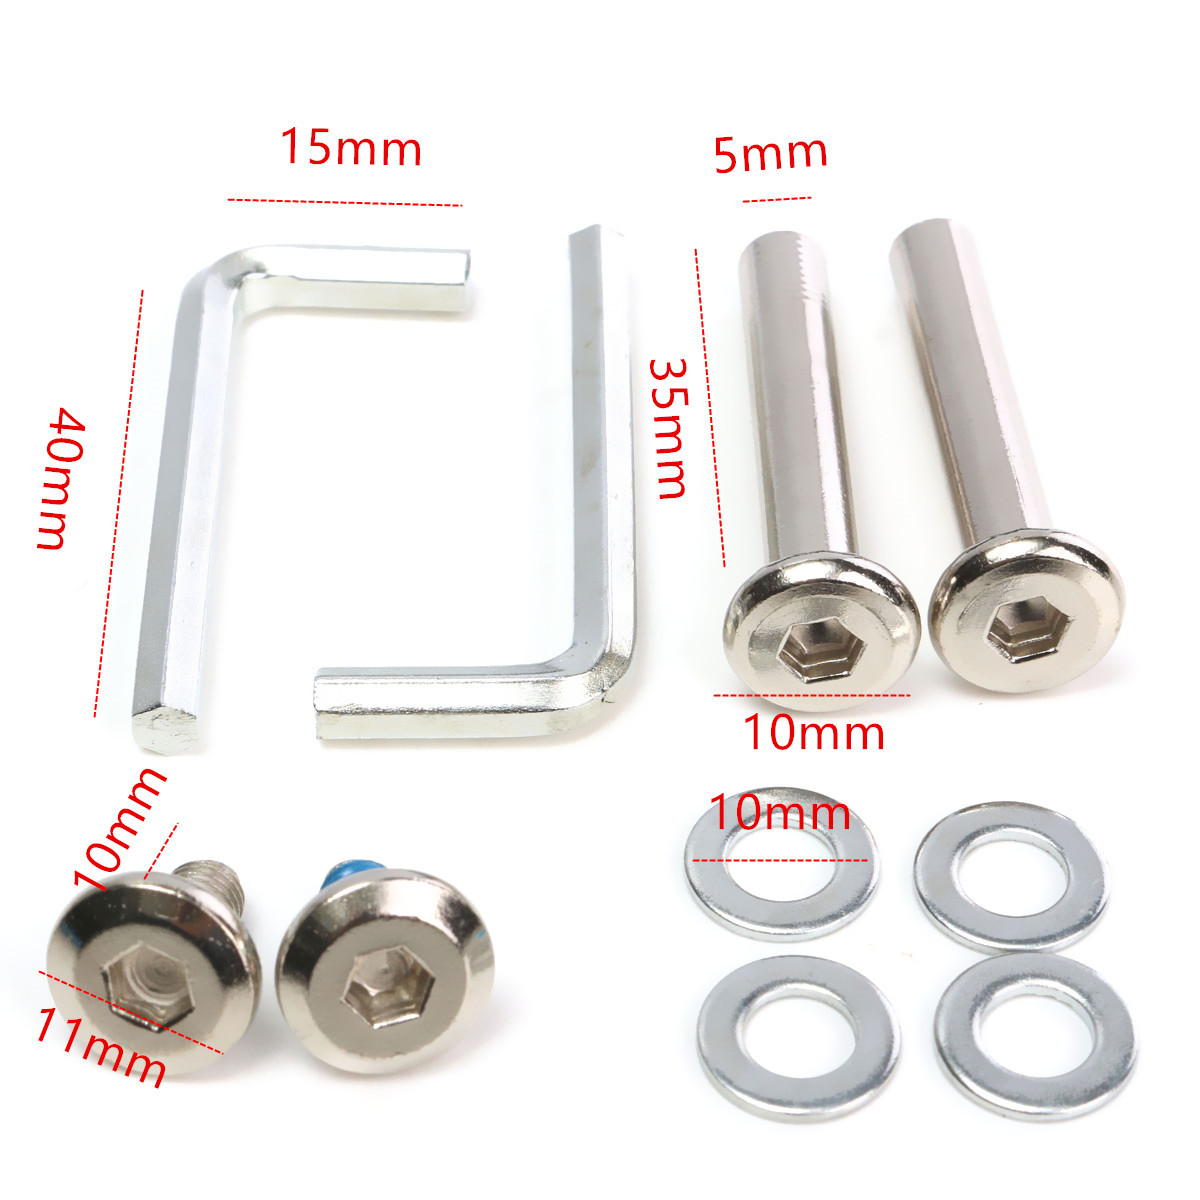 2pcs--Luggage-Suitcase-Replacement-Wheels-Axles-Deluxe-Repair-50times22mm-1041373-3